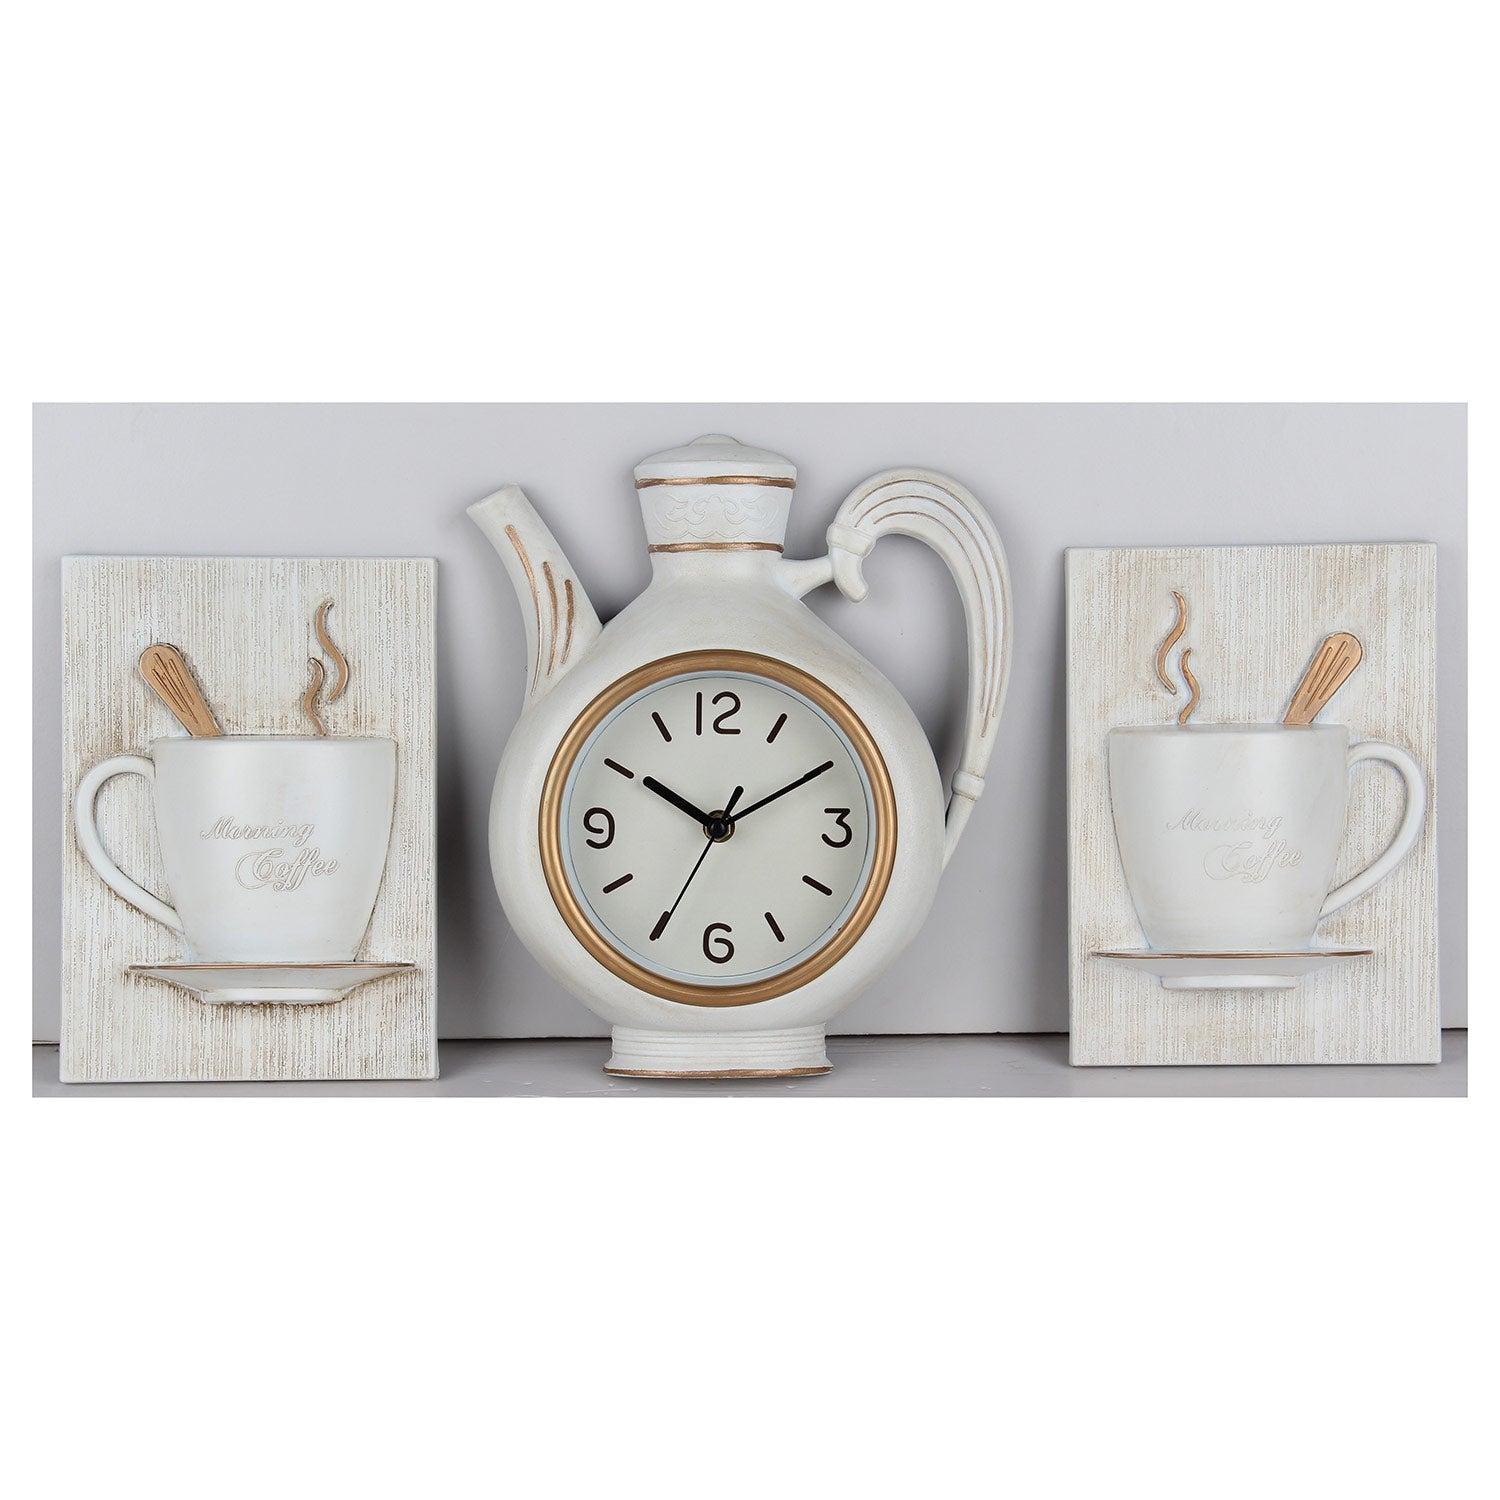 PREMIUS 3 Piece Coffee Wall Clock with Mugs Accent, White, 9x11 Inches